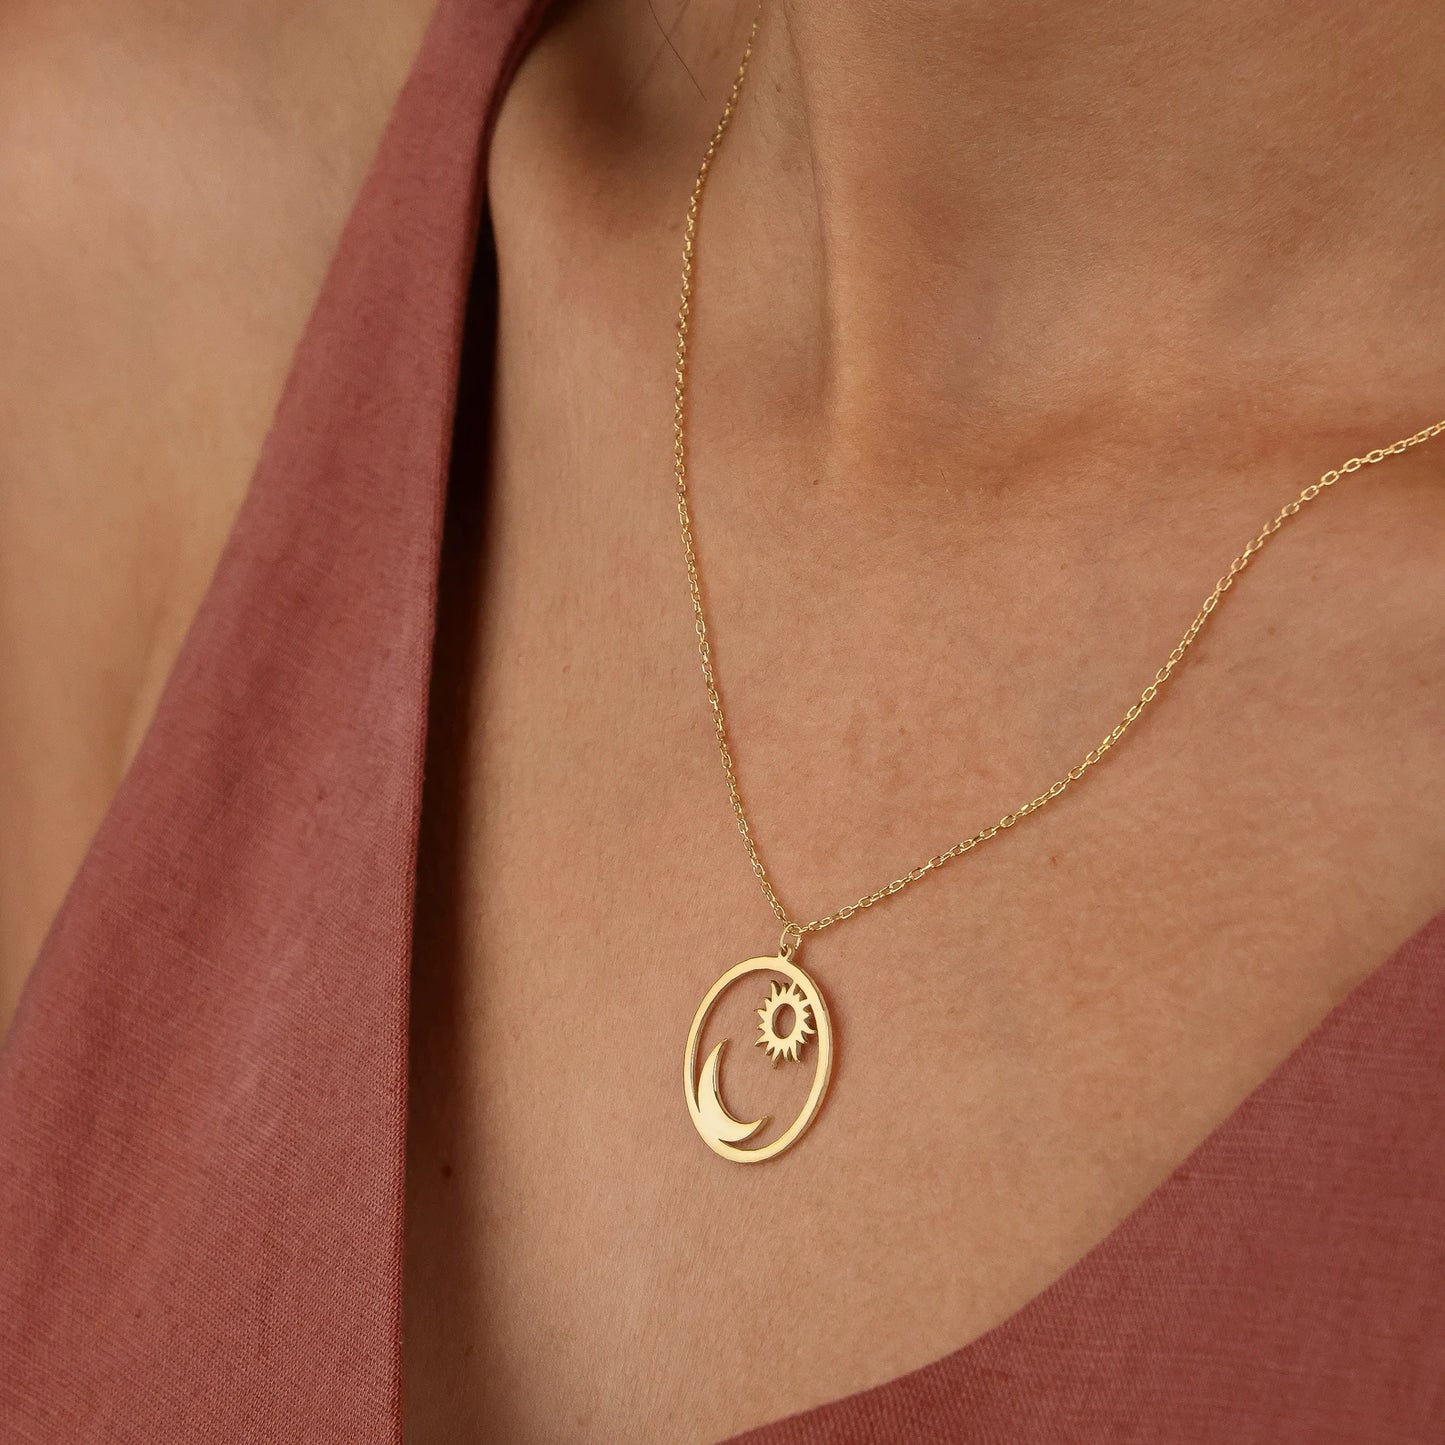 18 Carat Gold Sun and Moon Necklace - A celestial masterpiece inspired by Arabian nights, crafted for timeless elegance.